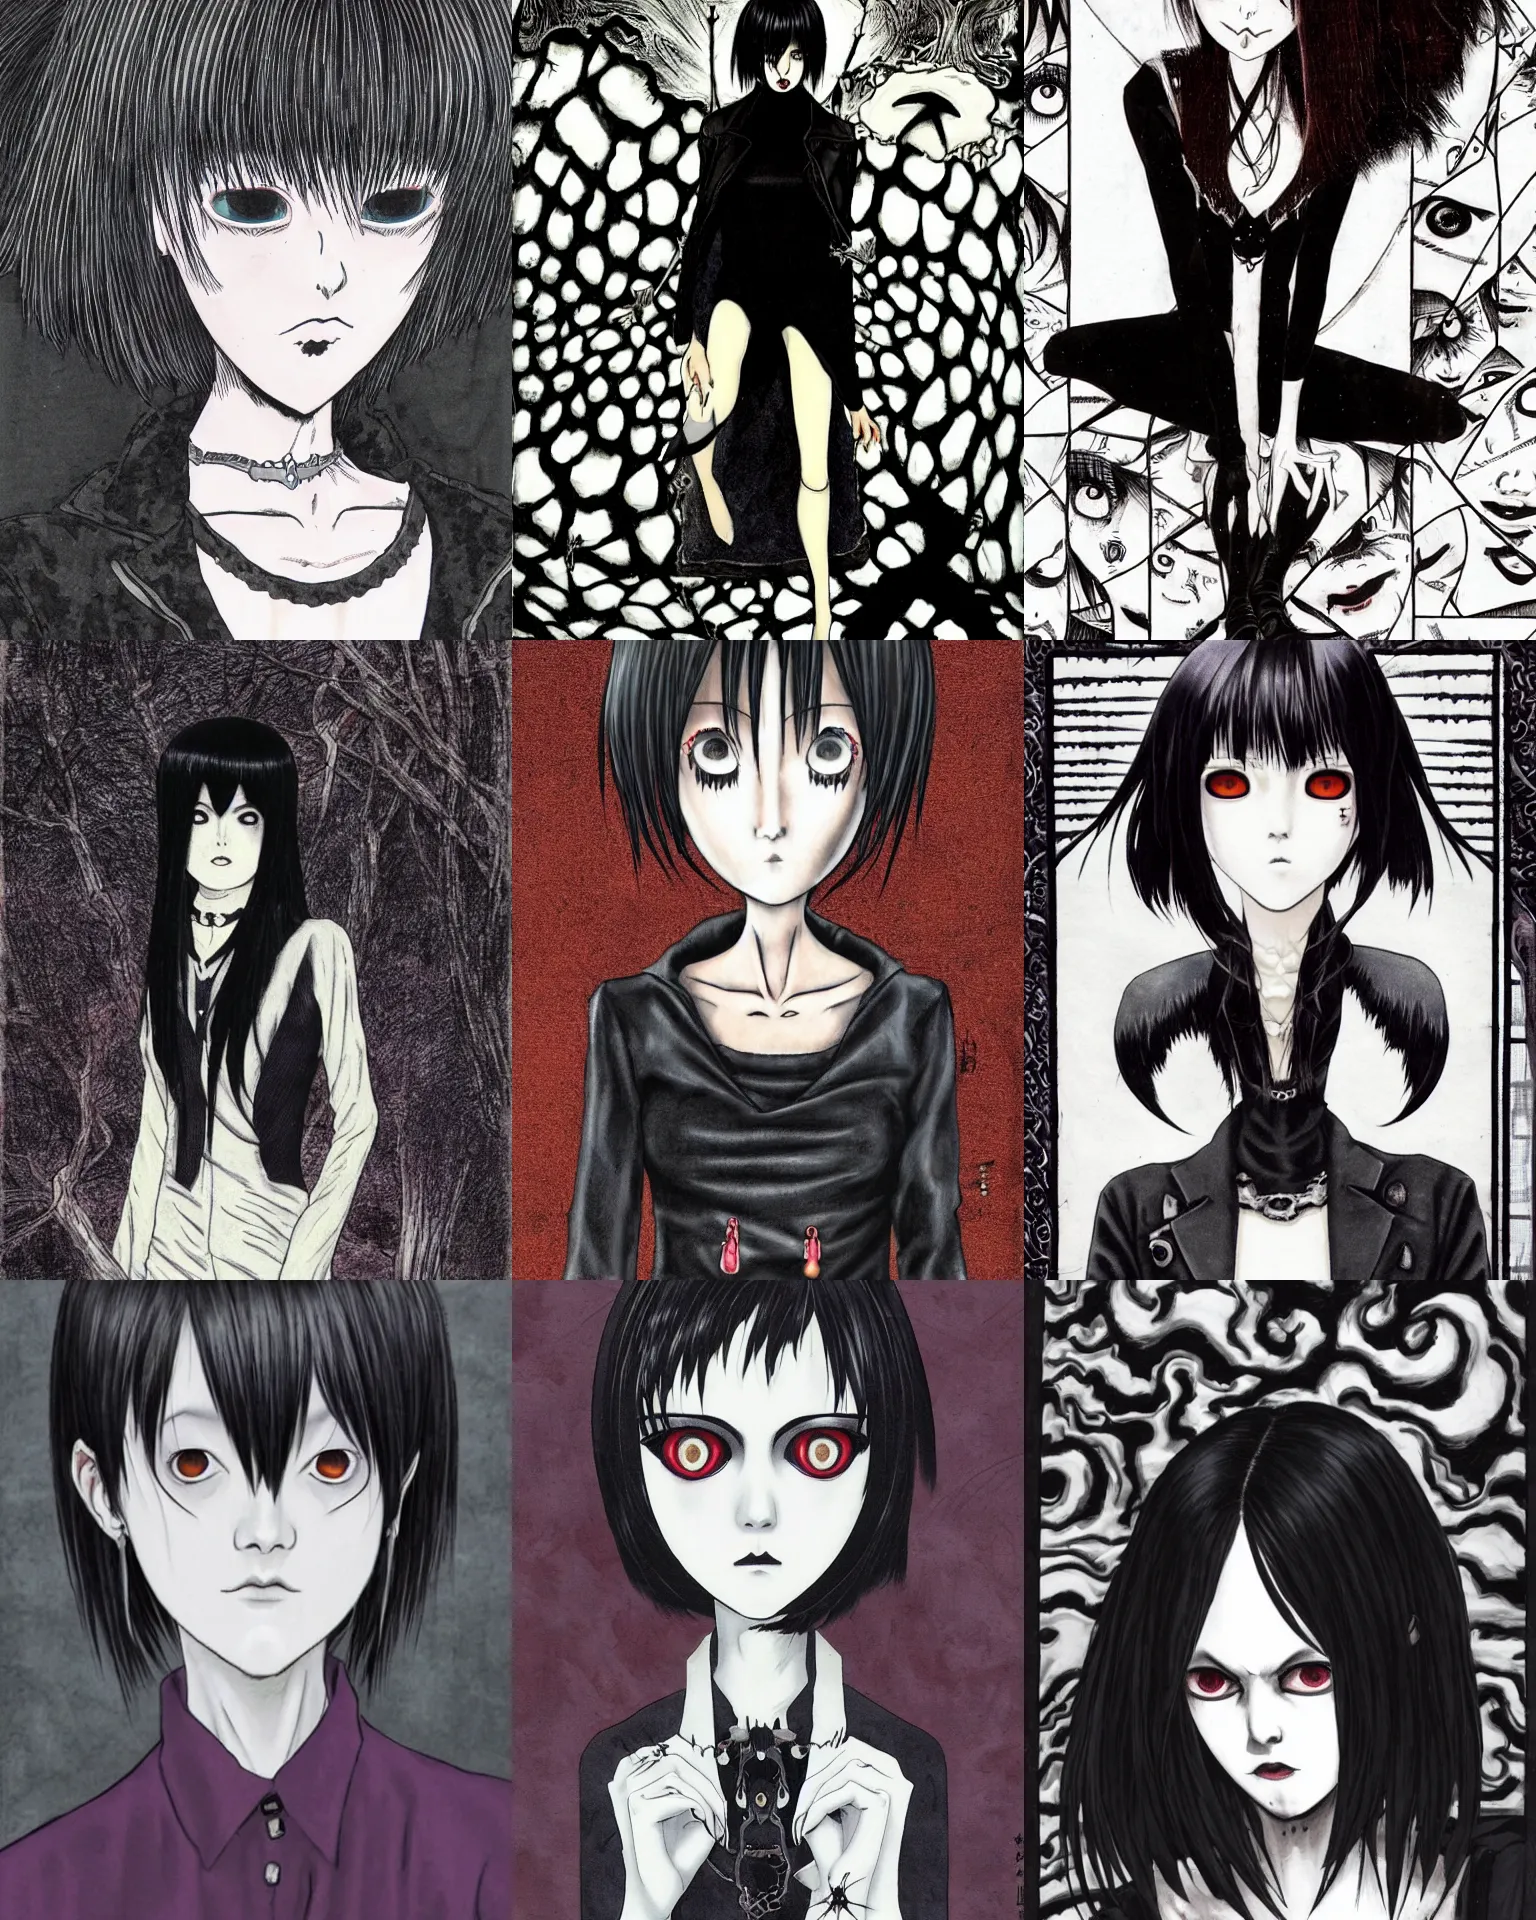 Prompt: A goth character portrait by Junji Ito. She has large evil eyes with entirely-black sclerae!!!!!! Her hair is dark brown and cut into a short, messy pixie cut. She has a slightly rounded face, with a pointed chin, and a small nose. She is wearing a black leather jacket, a black knee-length skirt, a black choker, and black leather boots.